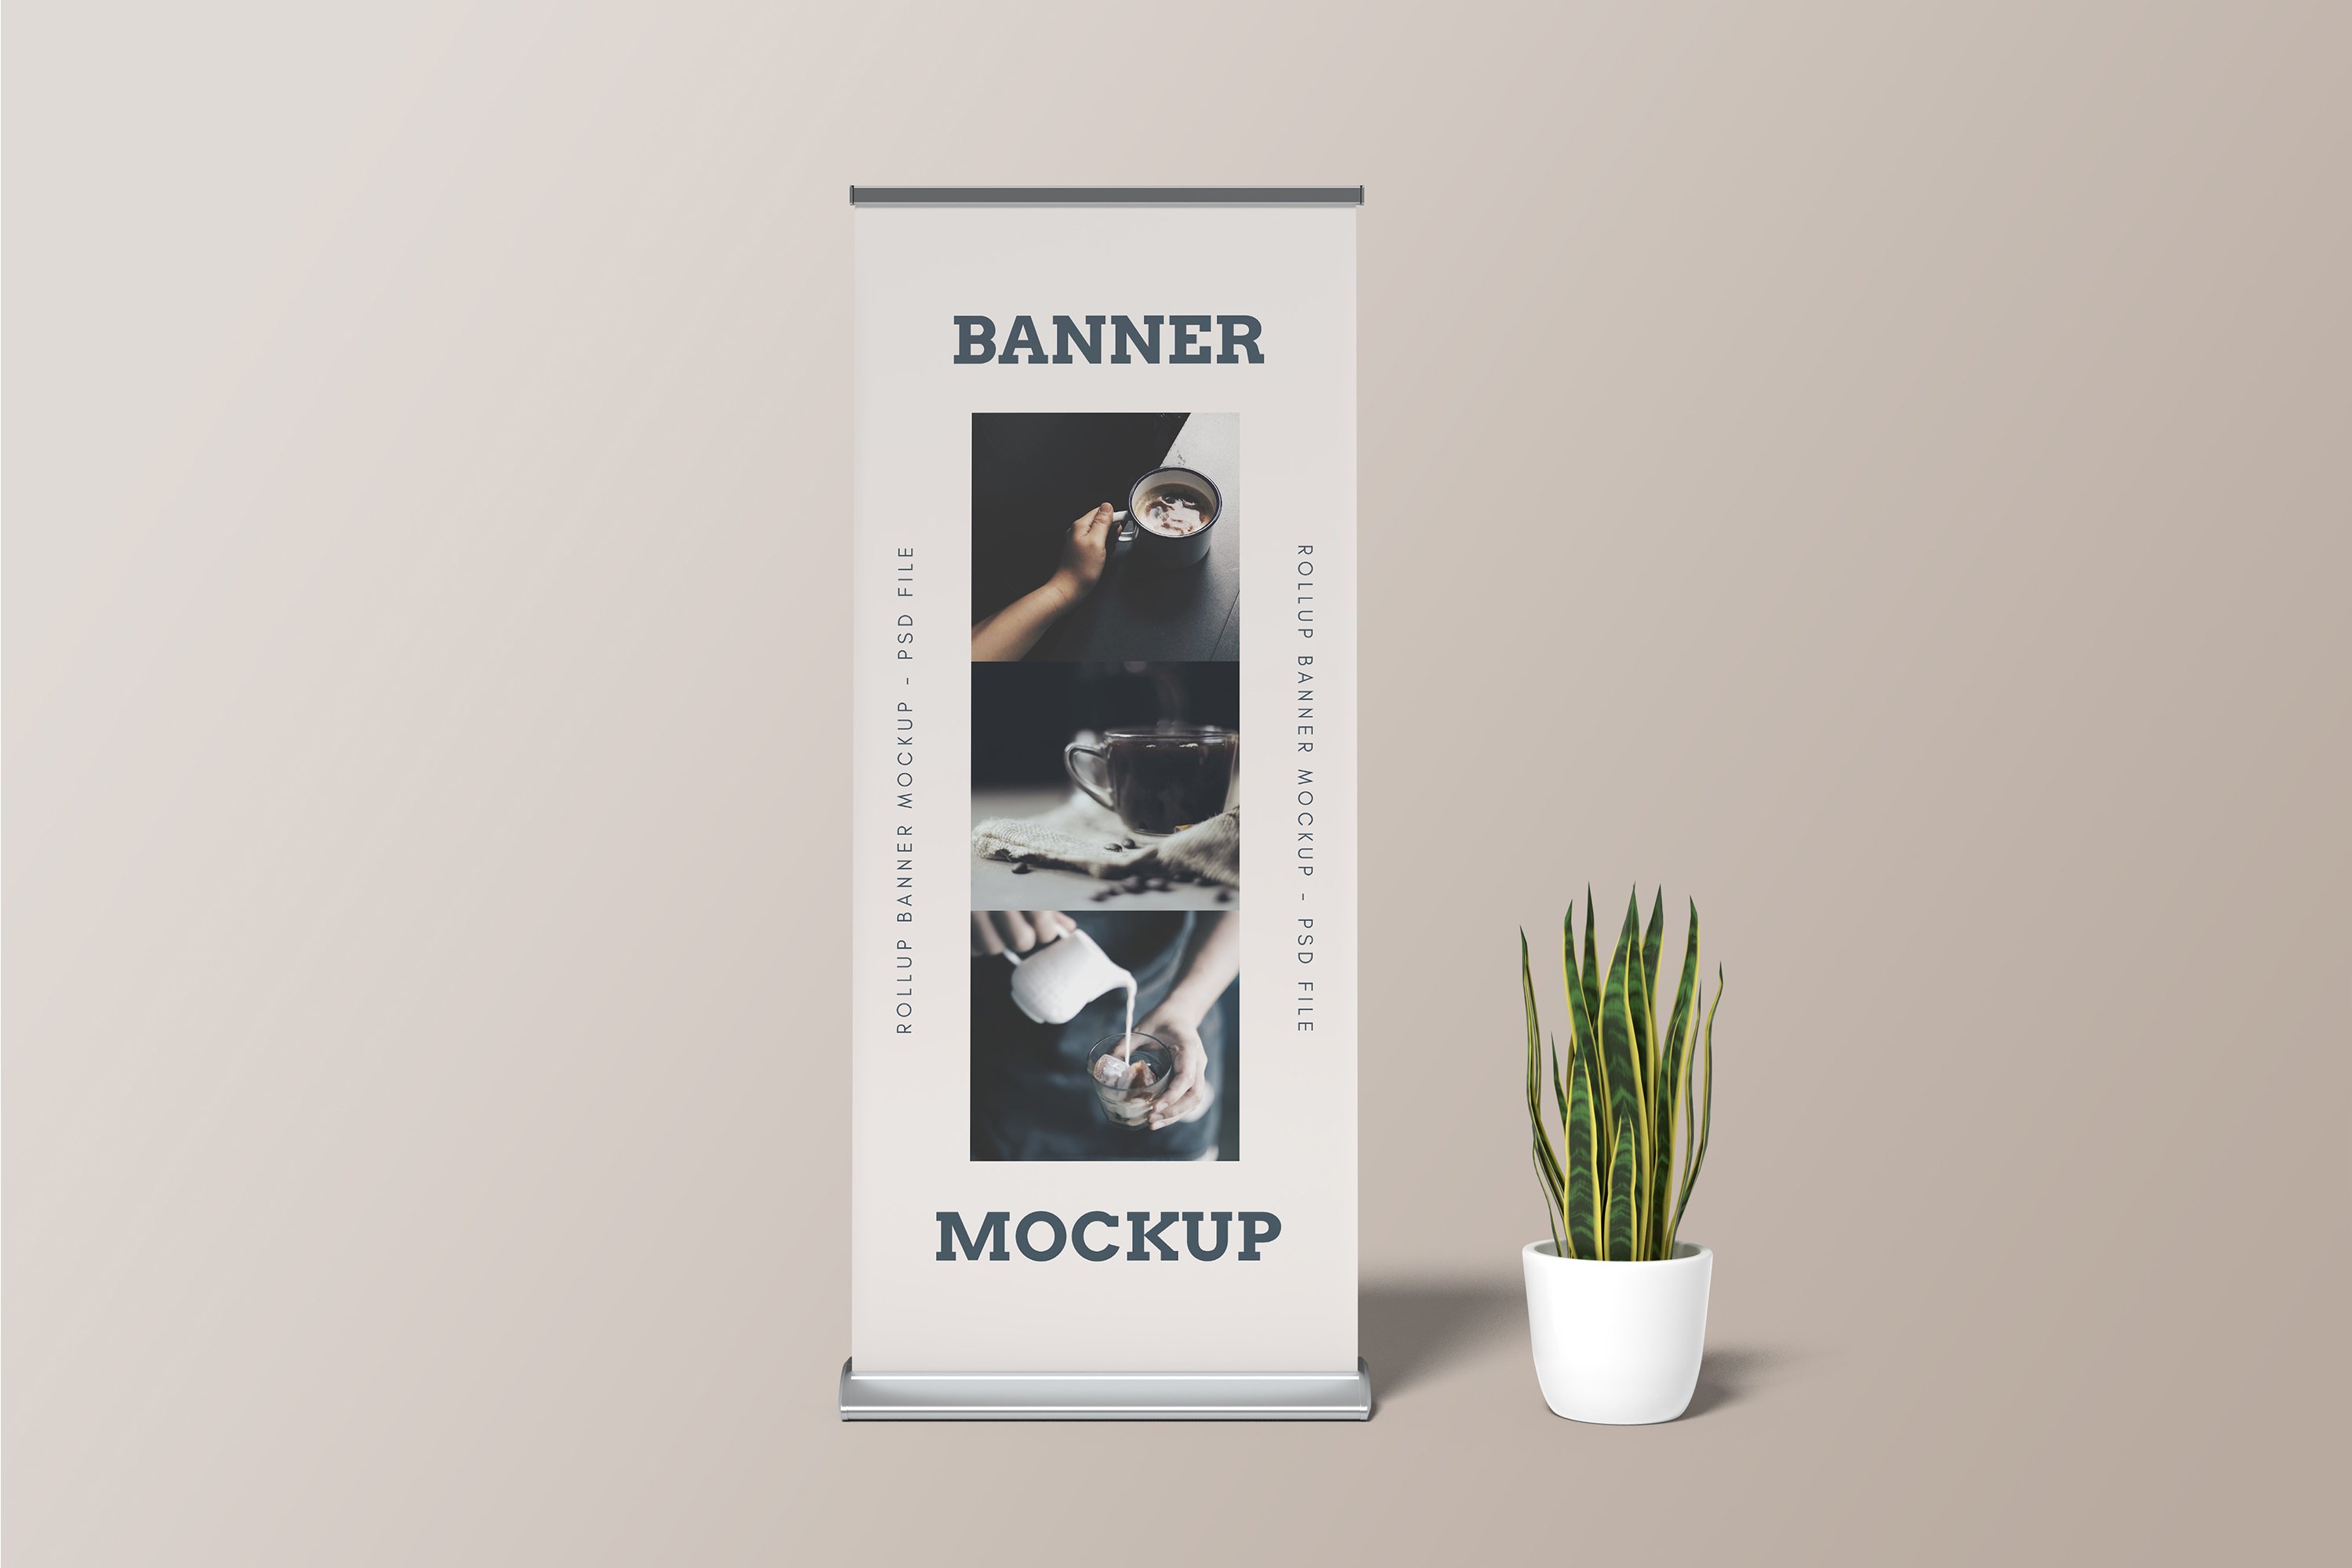 Rollup Banner Mockup preview image.